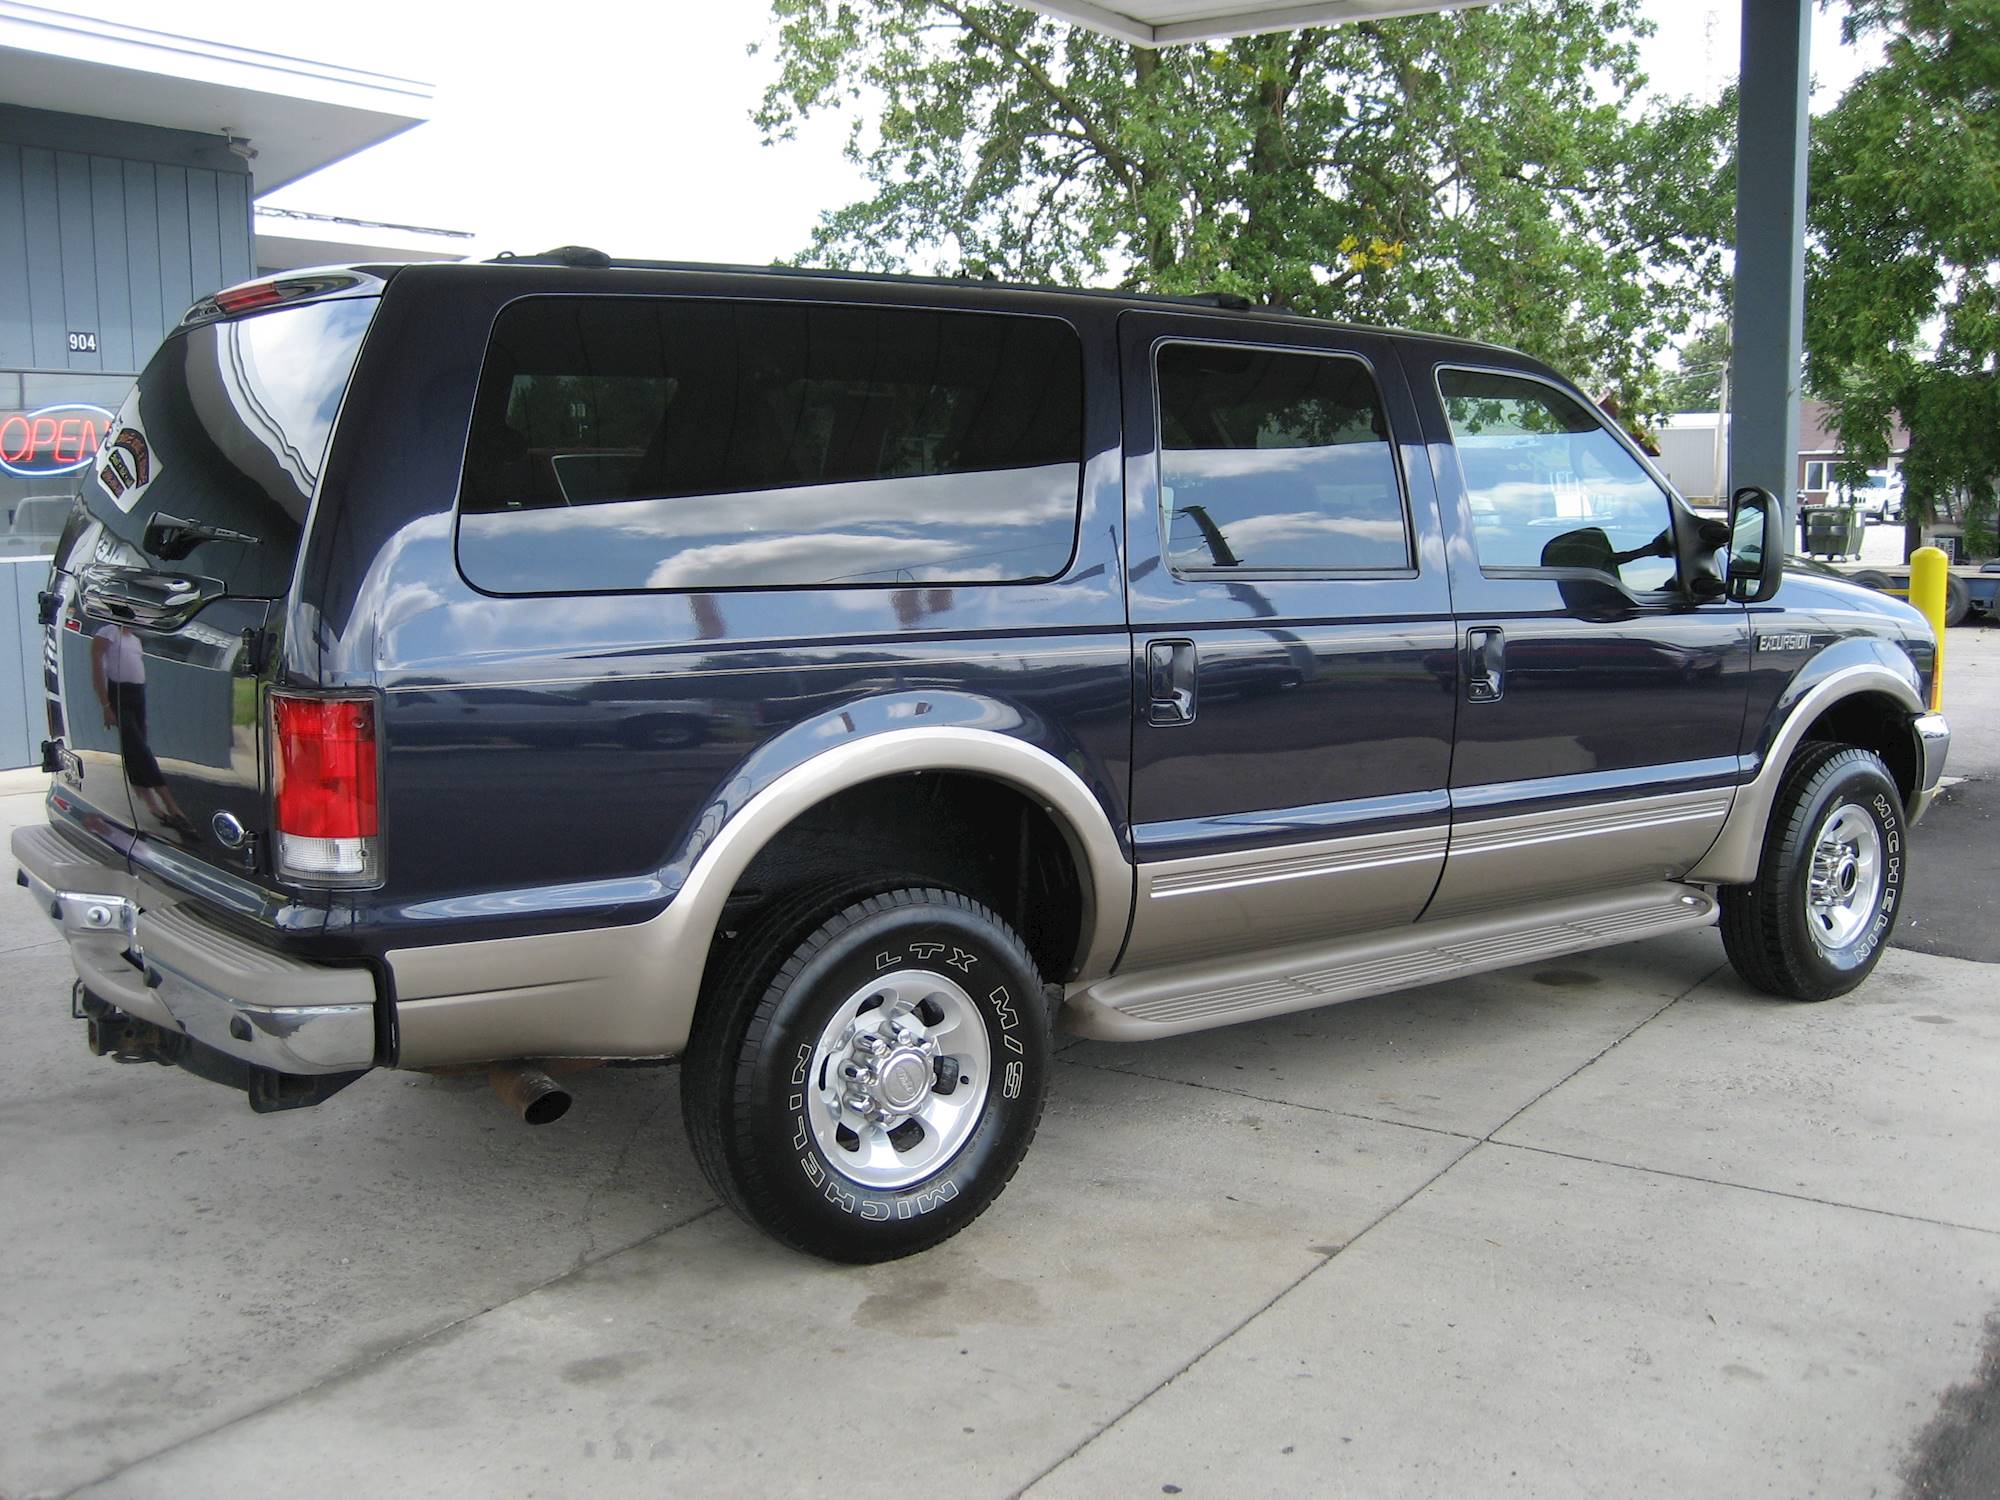 2001 ford excursion payload capacity